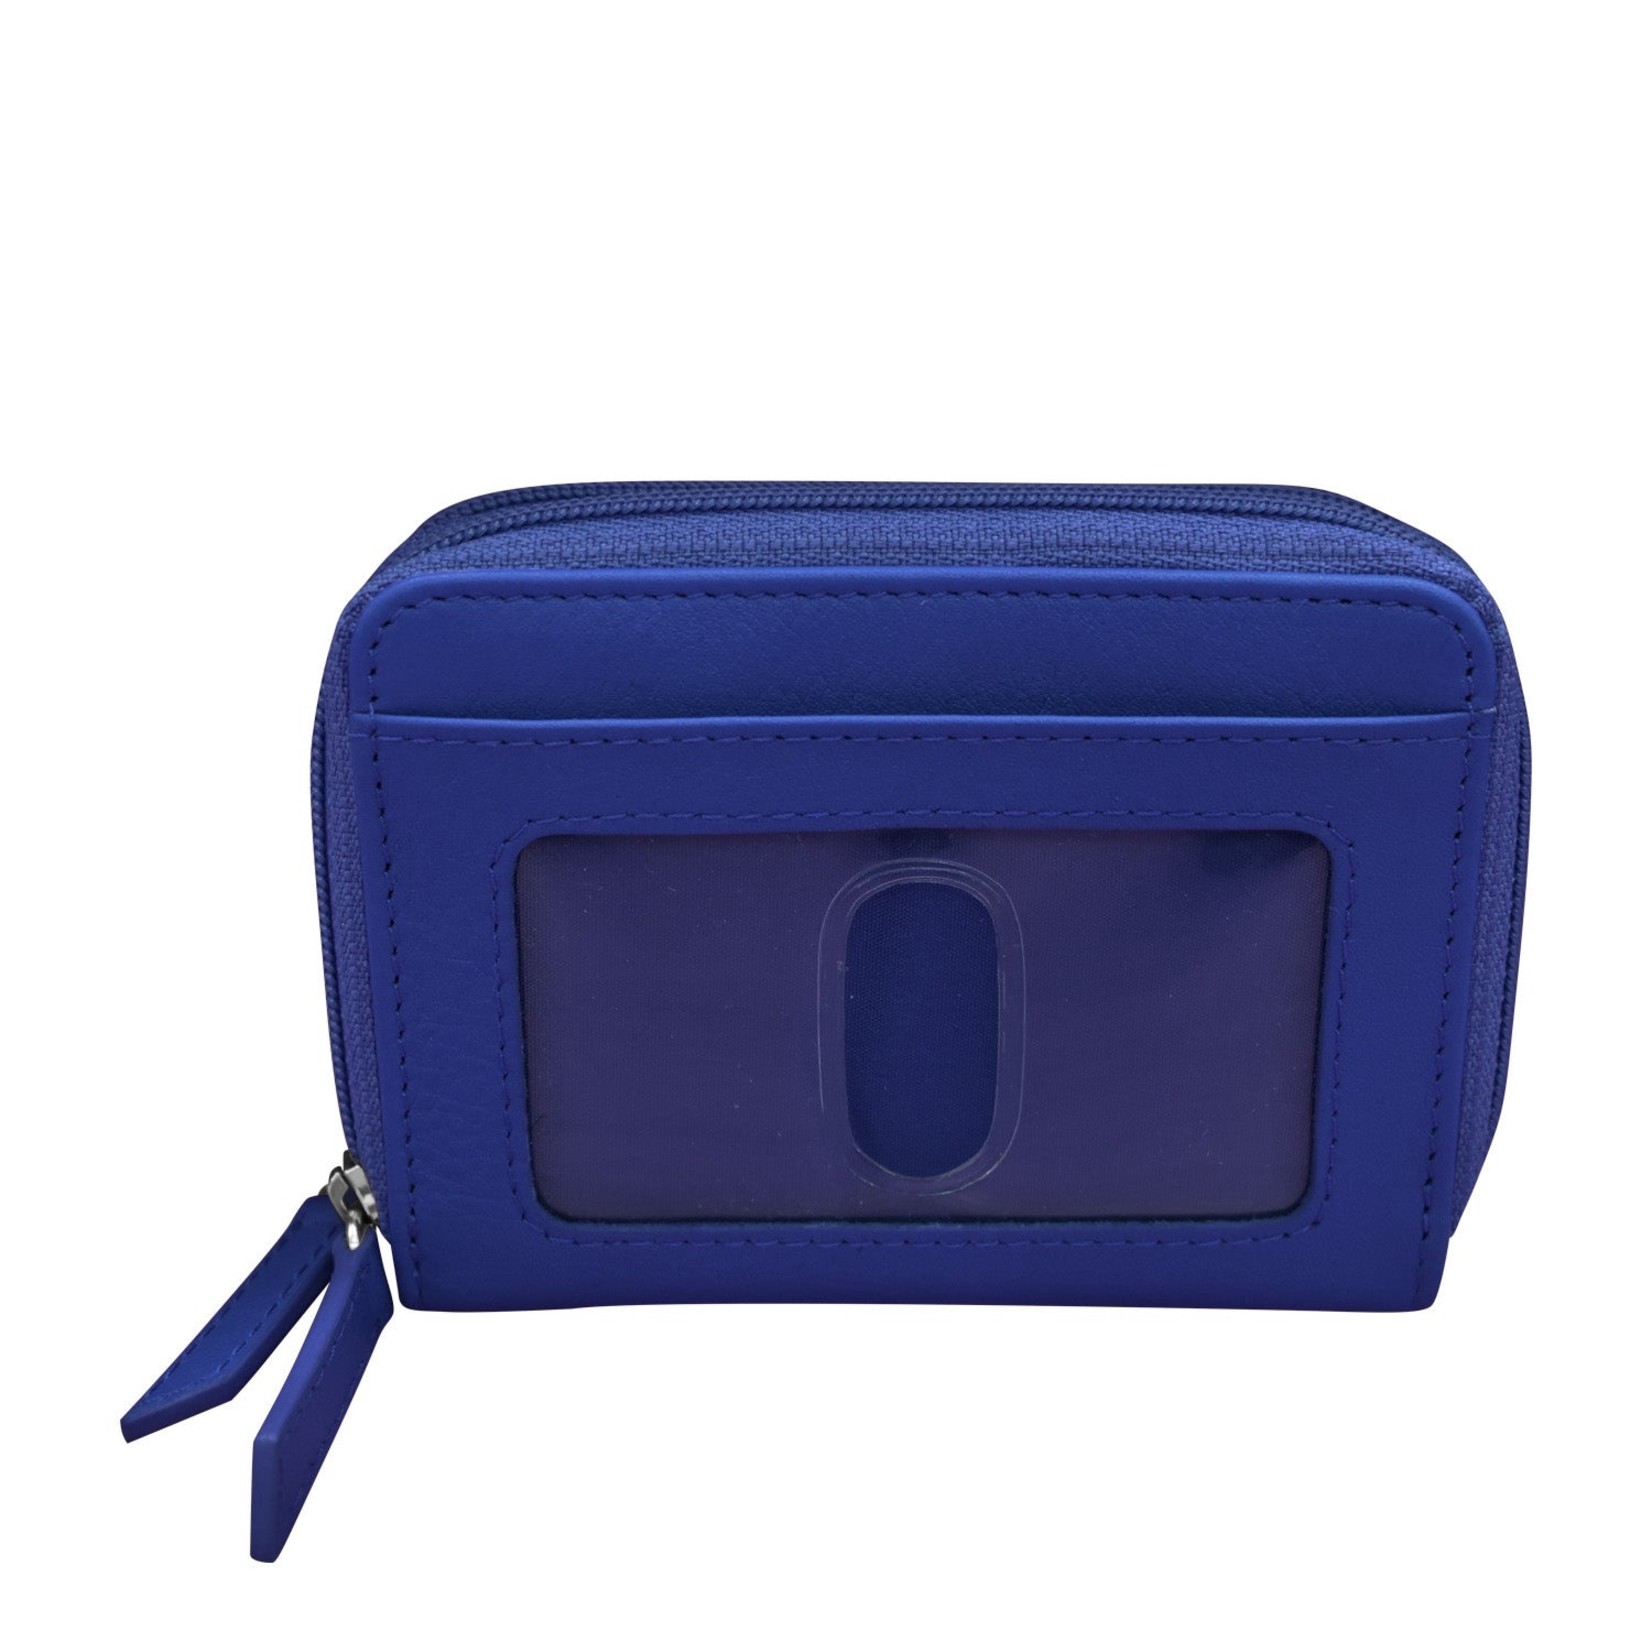 Leather Handbags and Accessories 6714 Cobalt - RFID Double Zip Accordion Card Holder